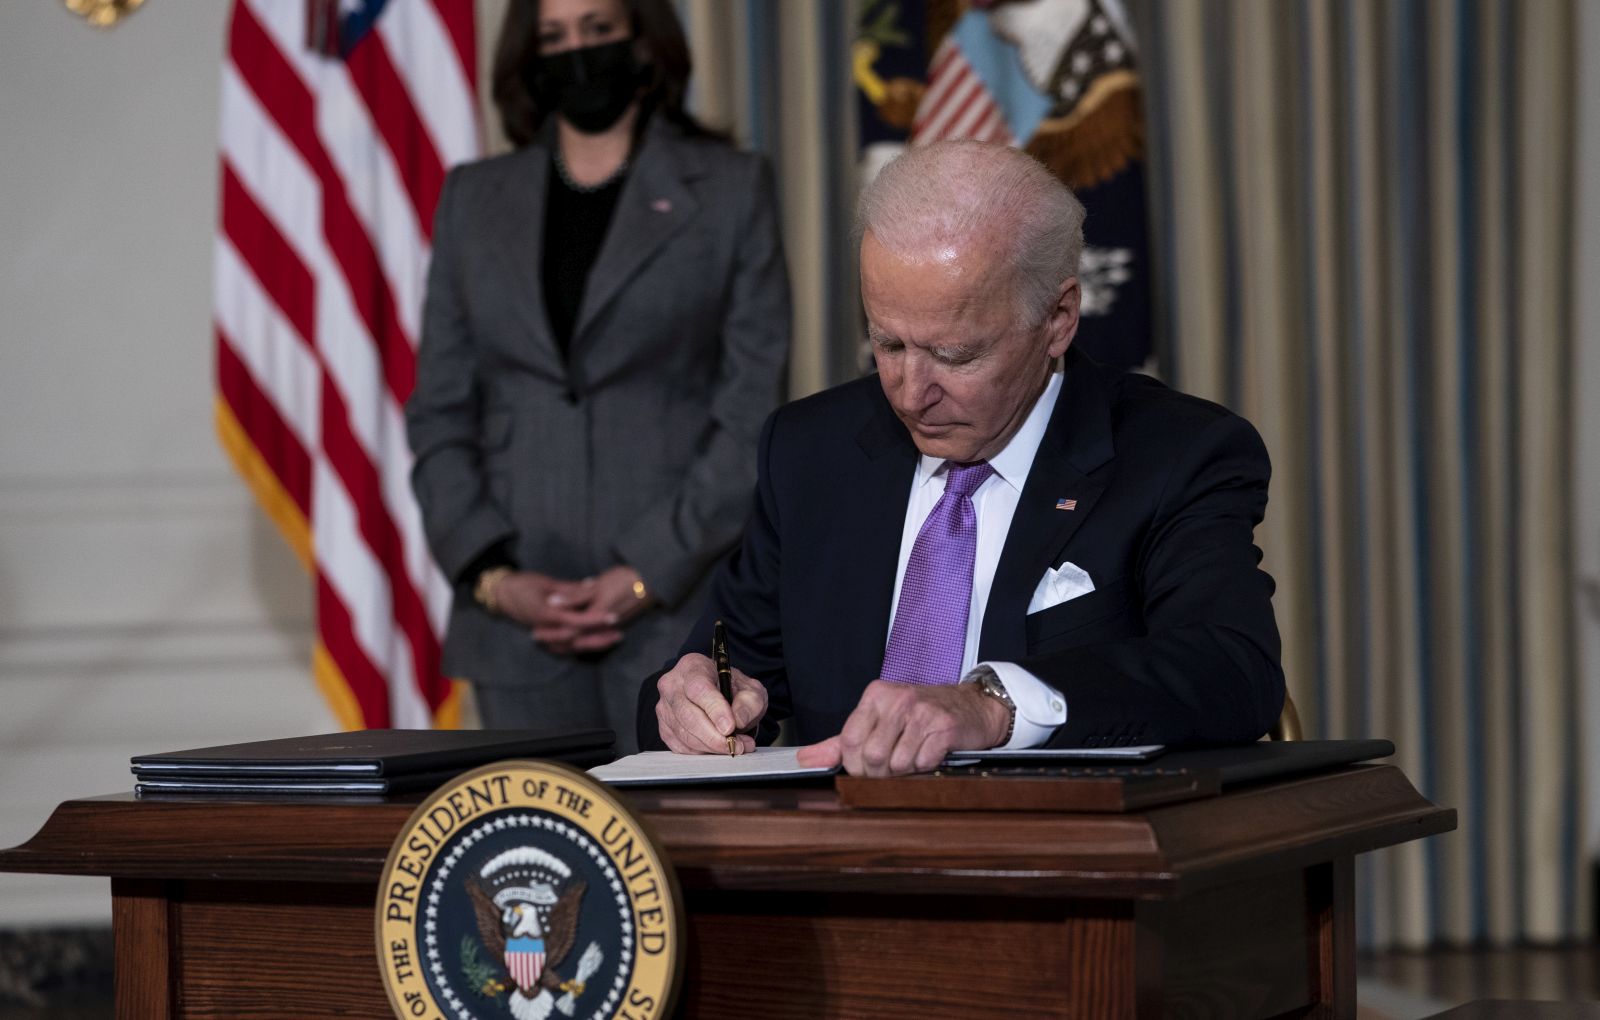 epa08967291 US President Joe Biden delivers remarks outlining his racial equity agenda and signs executive actions with Vice President Kamala Harris in the State Dining Room of the White House, in Washington, DC, USA, 26 January 2021.  EPA/Doug Mills / POOL